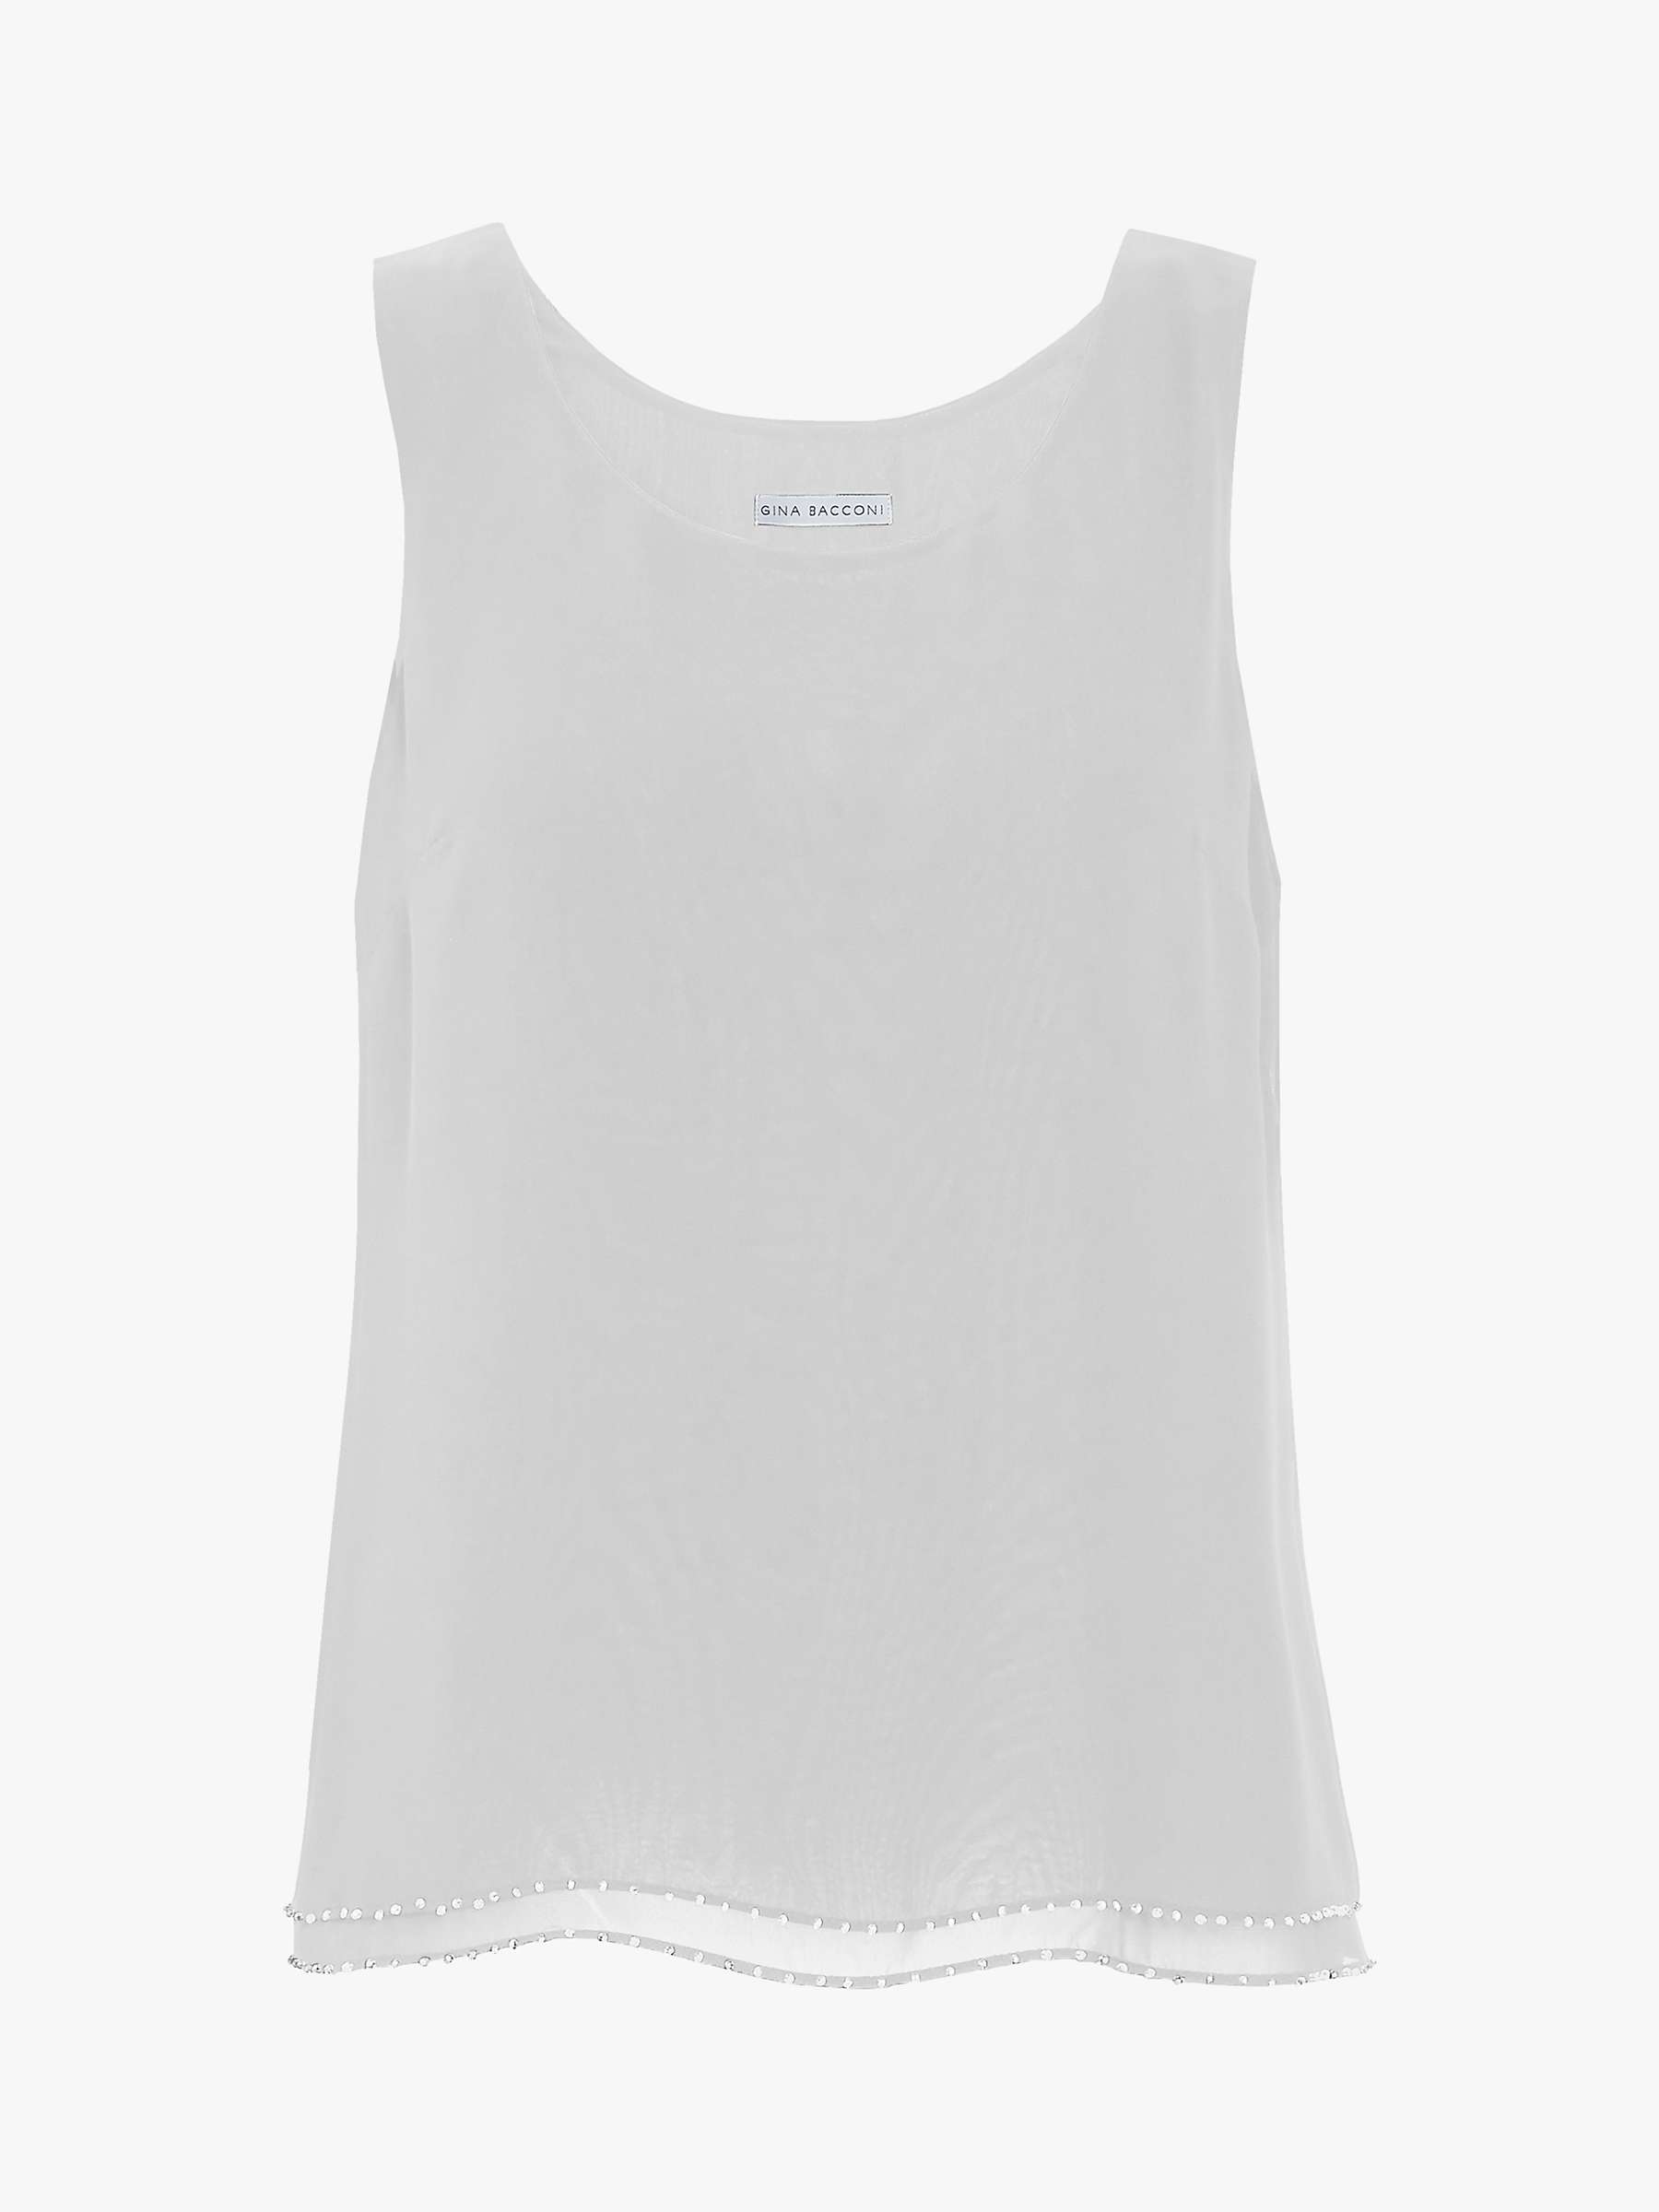 Buy Gina Bacconi Double Layer Chiffon Cami Top Online at johnlewis.com